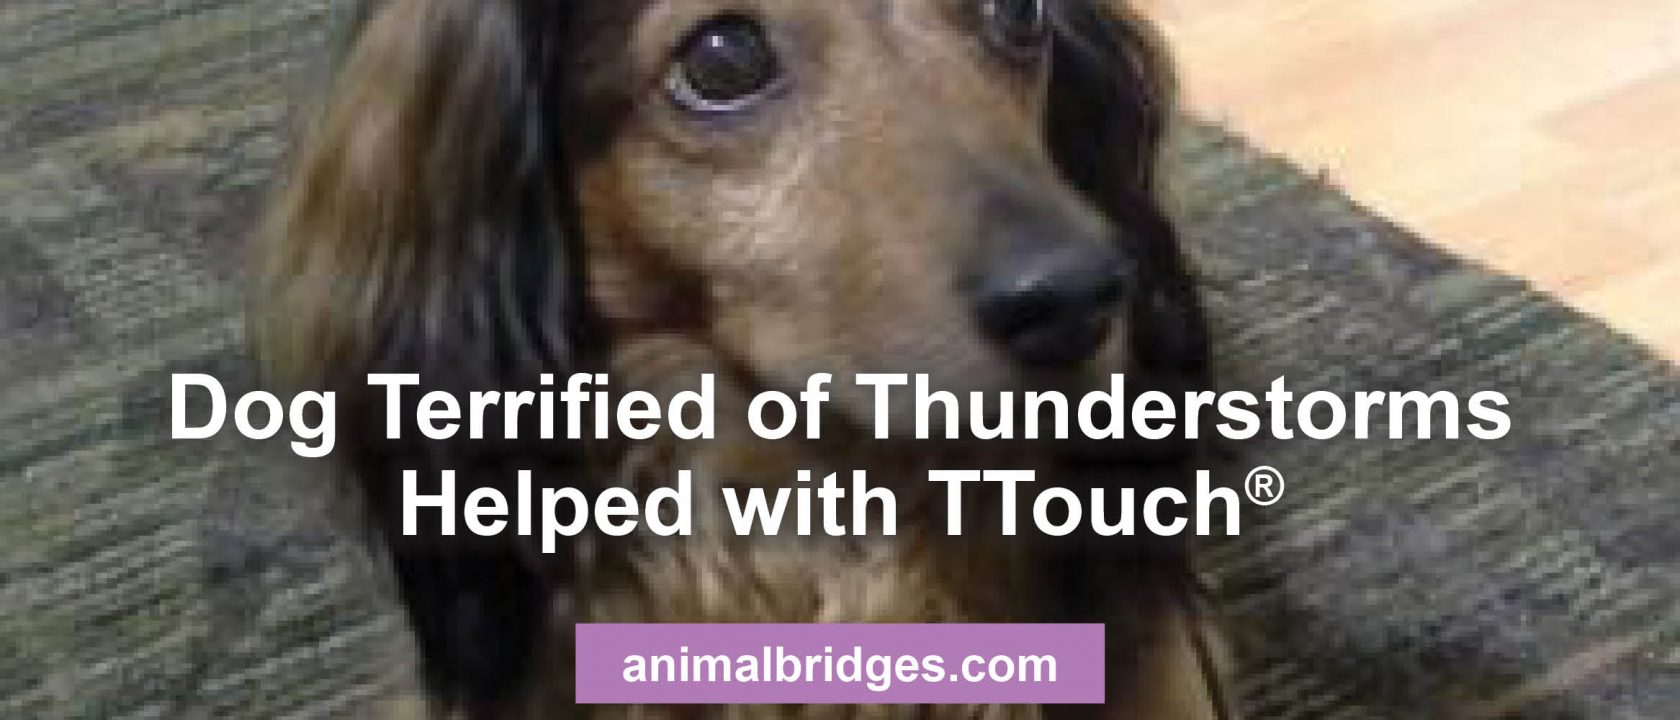 Dog terrified of thunderstorms Ttouch